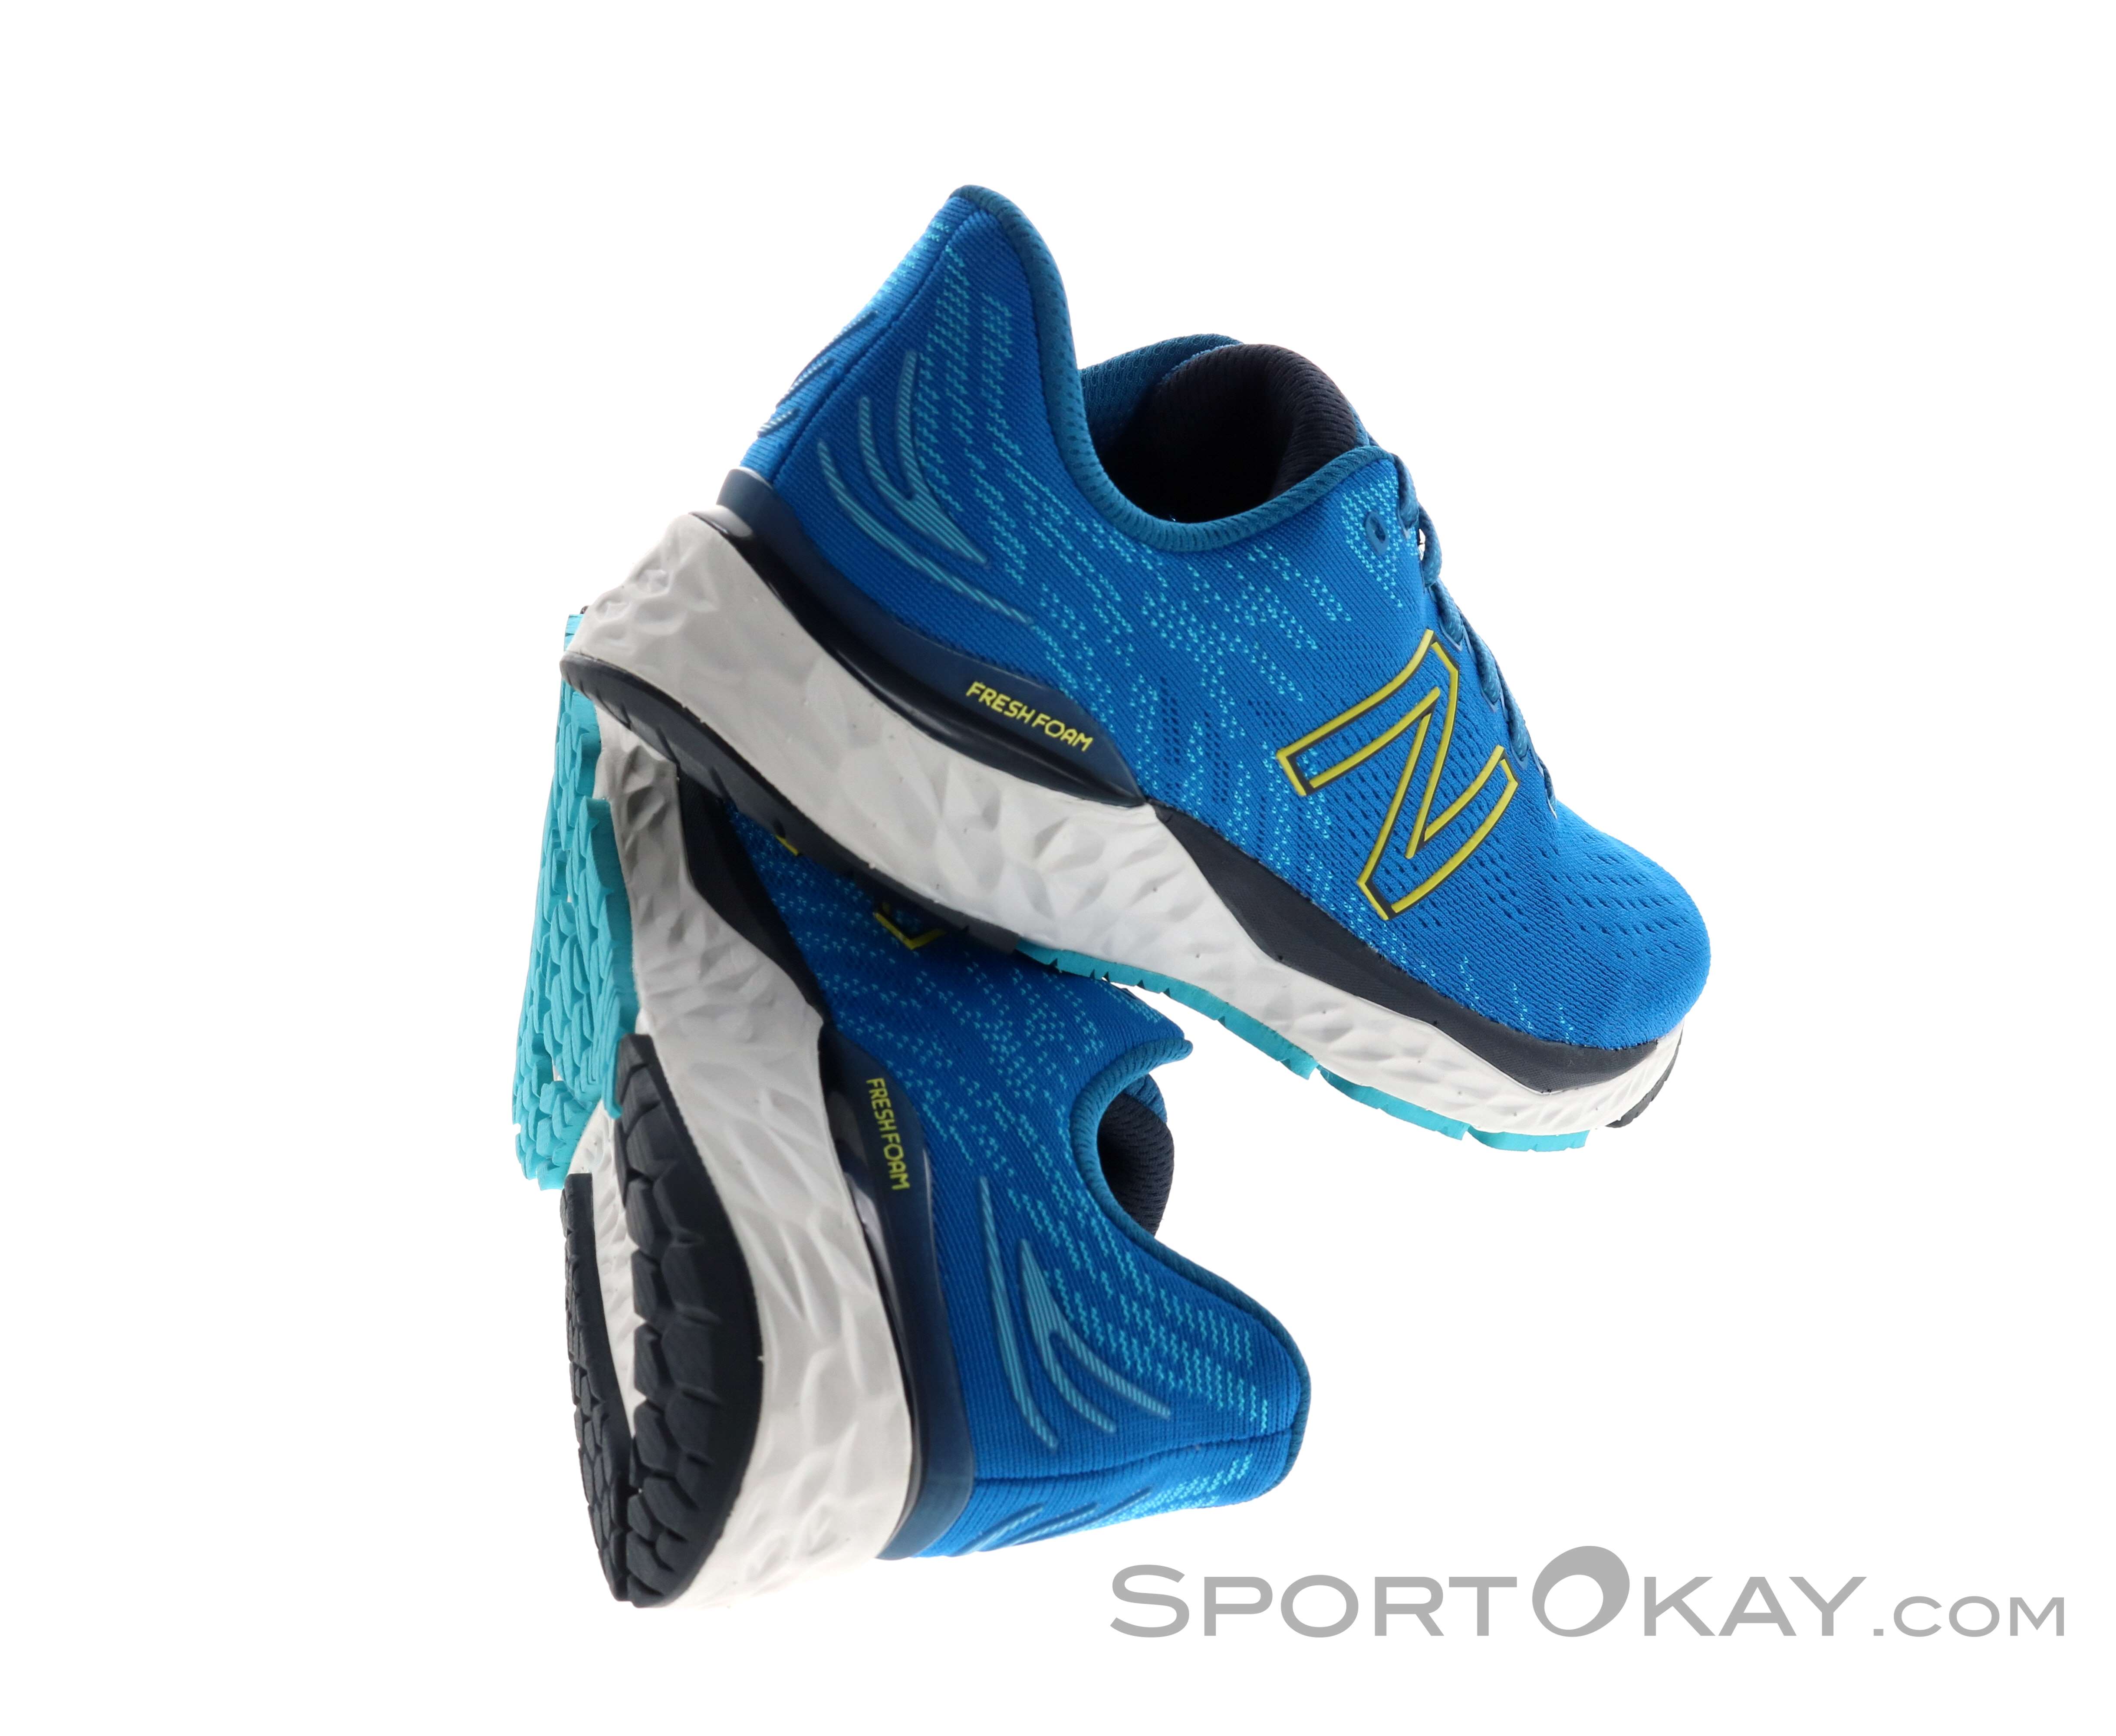 New Balance 880v11 Mens Running Shoes - All-Round Running Shoes - Running Shoes Running - All